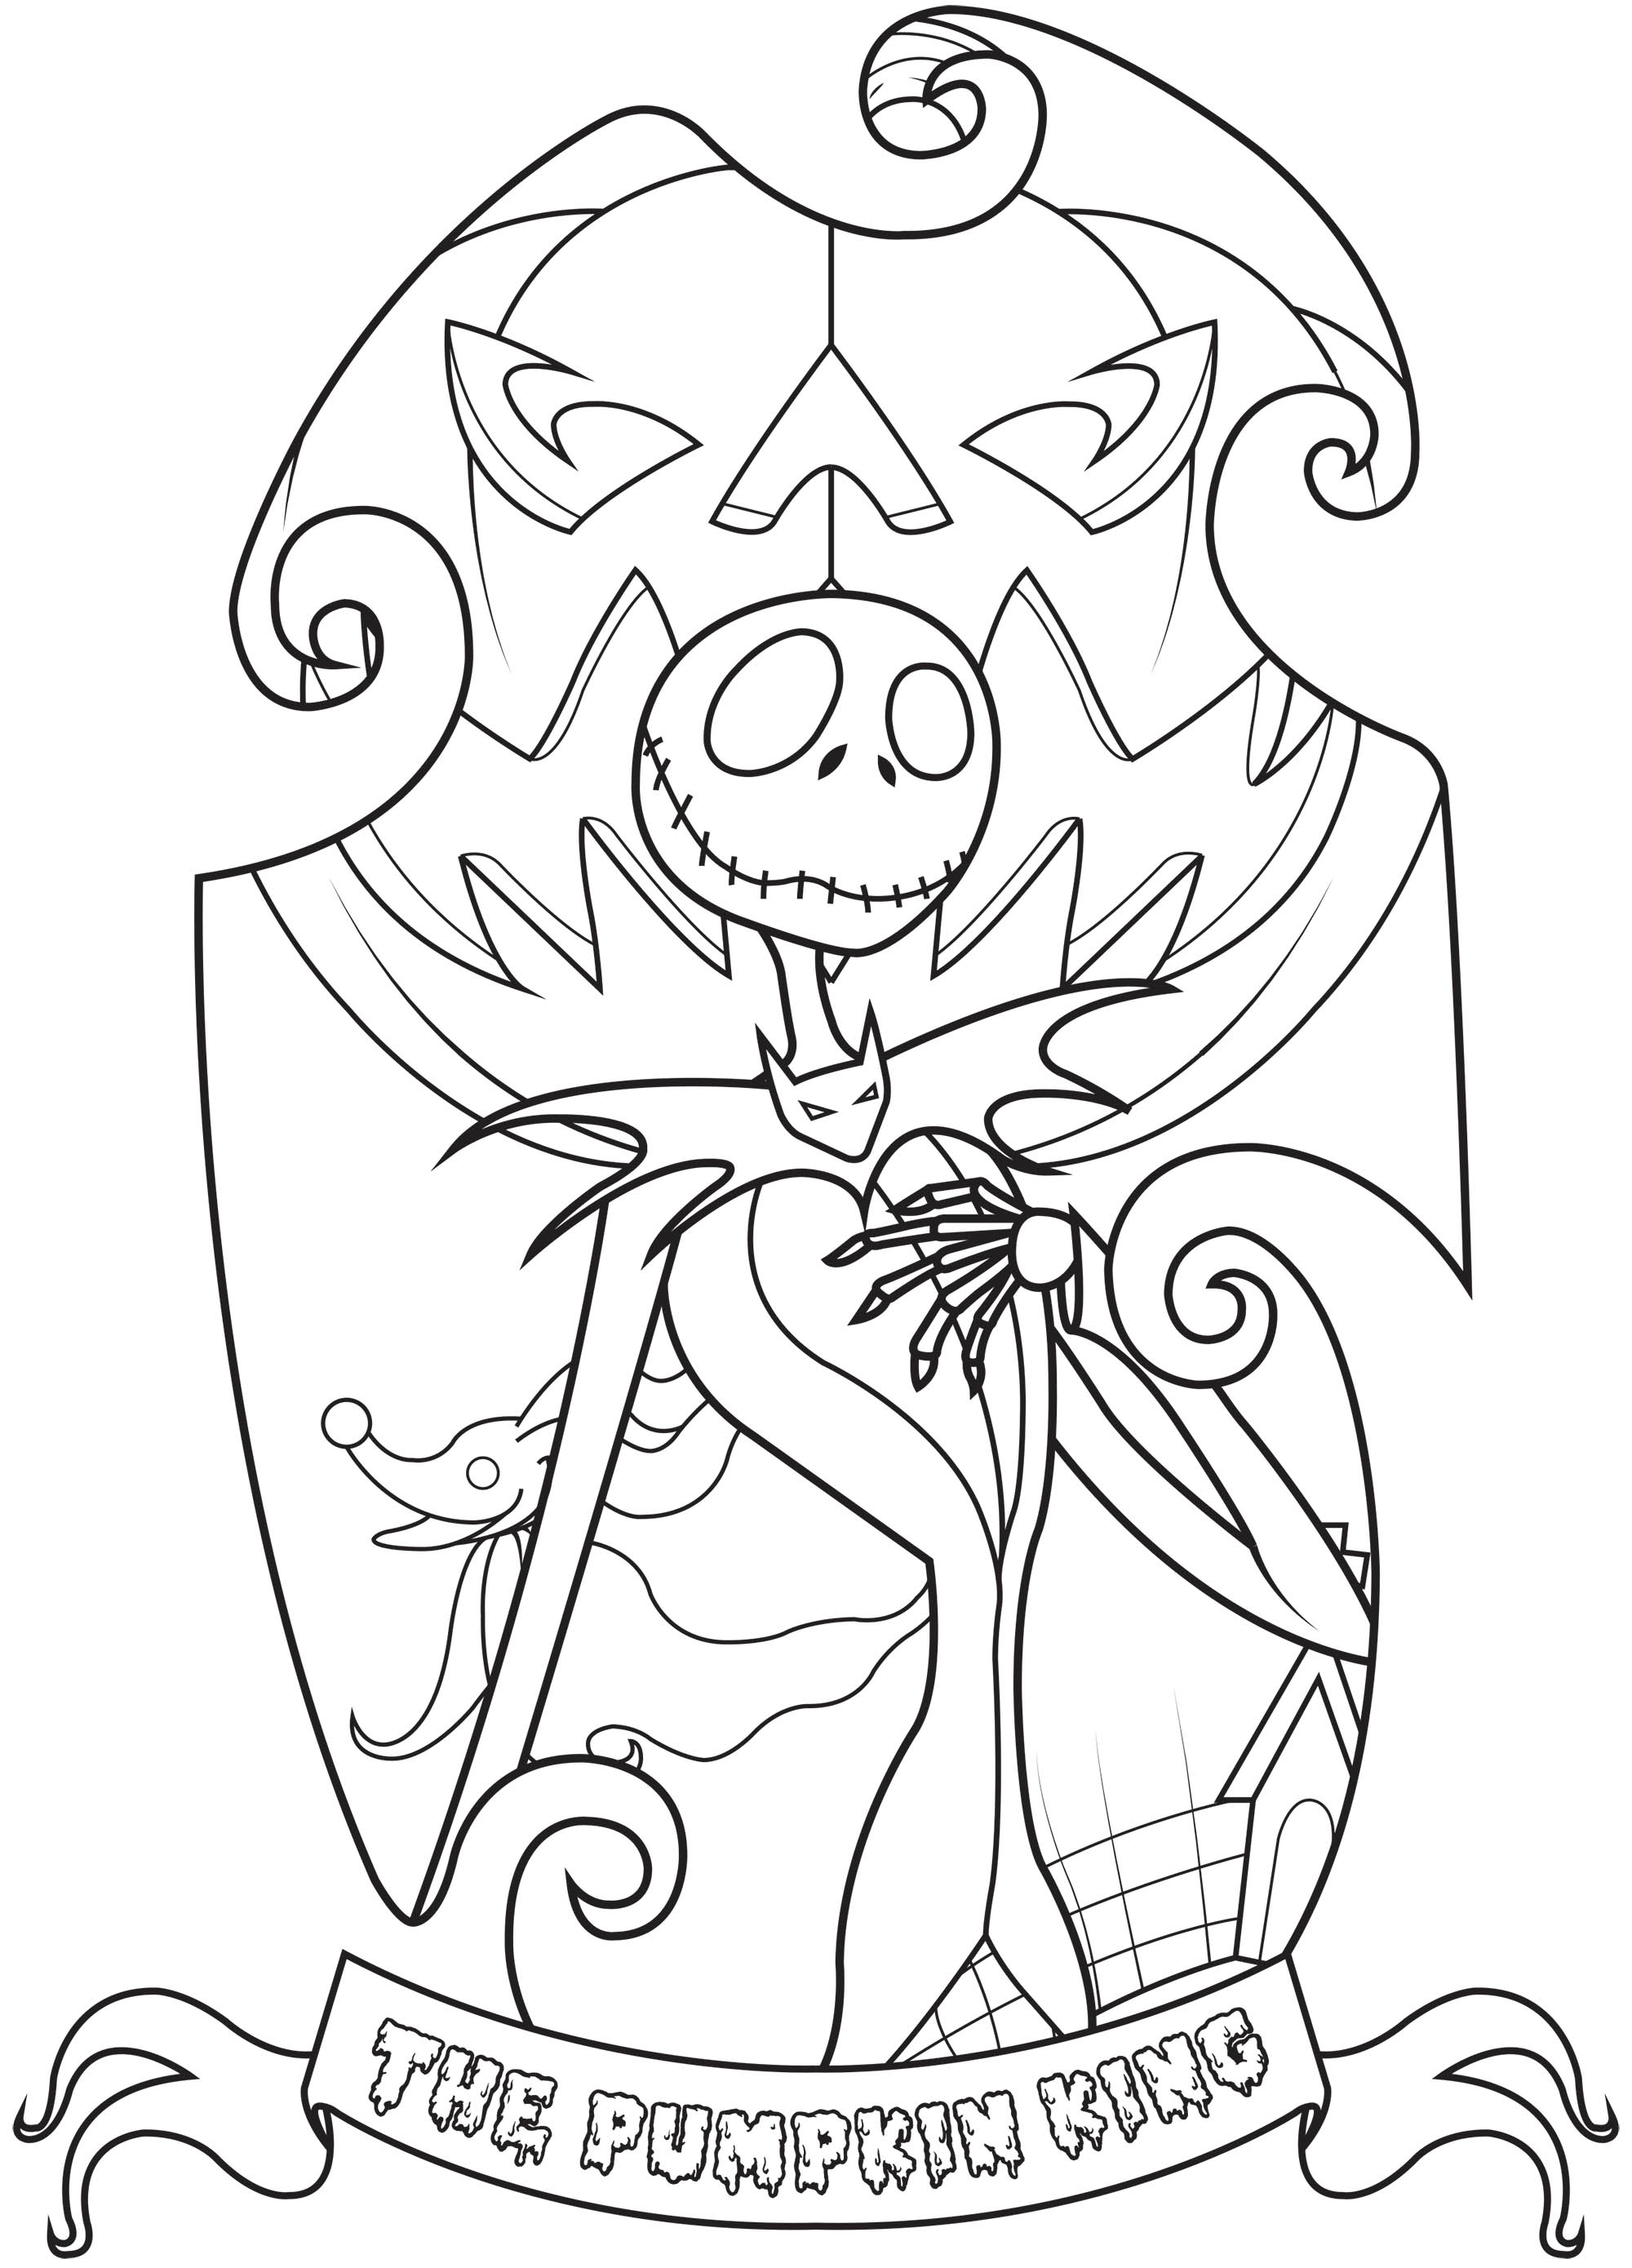 jack-skellington-the-nightmare-before-christmas-kids-coloring-pages